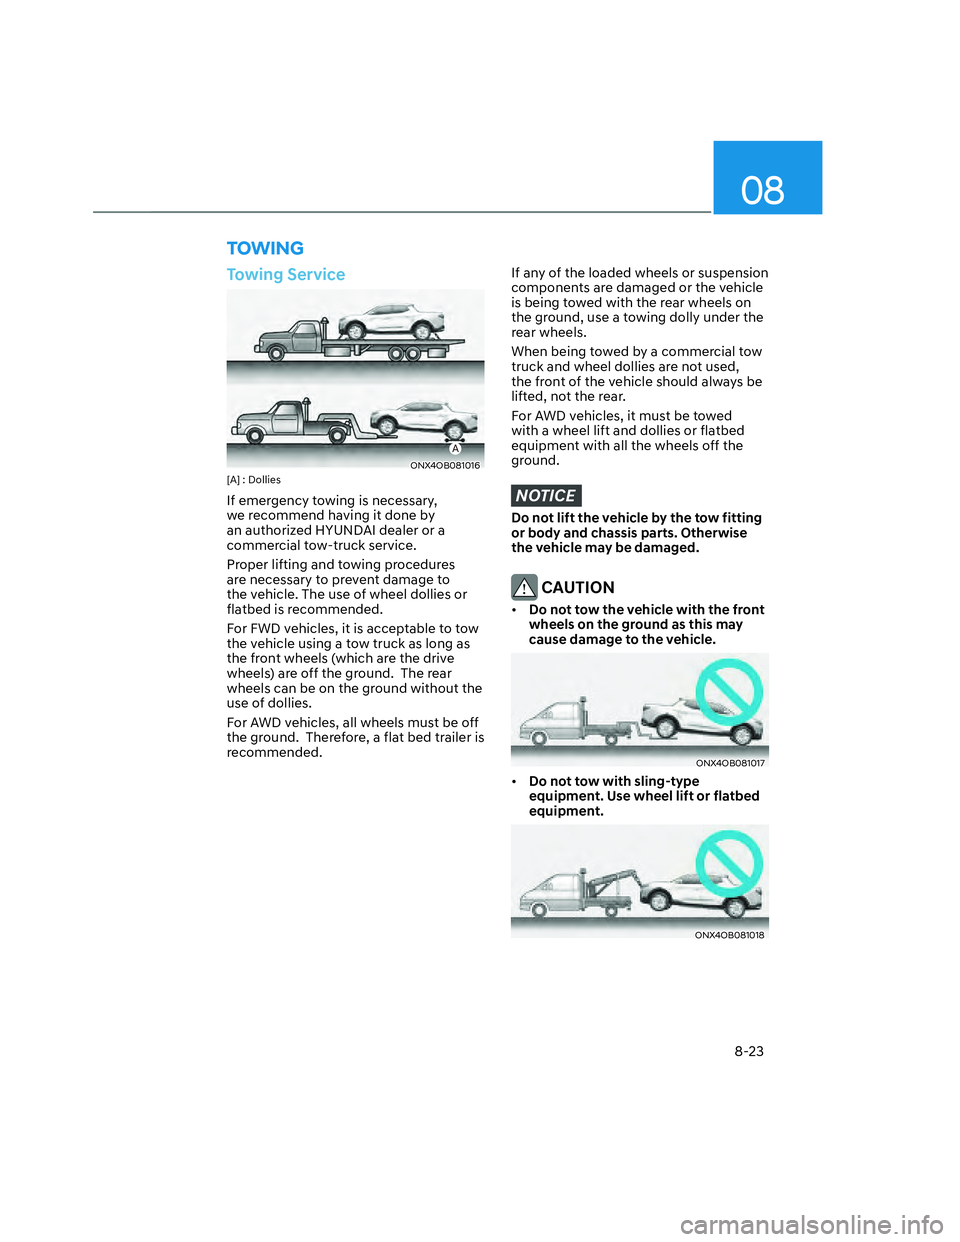 HYUNDAI SANTA CRUZ 2022  Owners Manual 08
8-23
TOWING
Towing Service
A
ONX4OB081016ONX4OB081016[A] : Dollies
If emergency towing is necessary, 
we recommend having it done by 
an authorized HYUNDAI dealer or a 
commercial tow-truck service